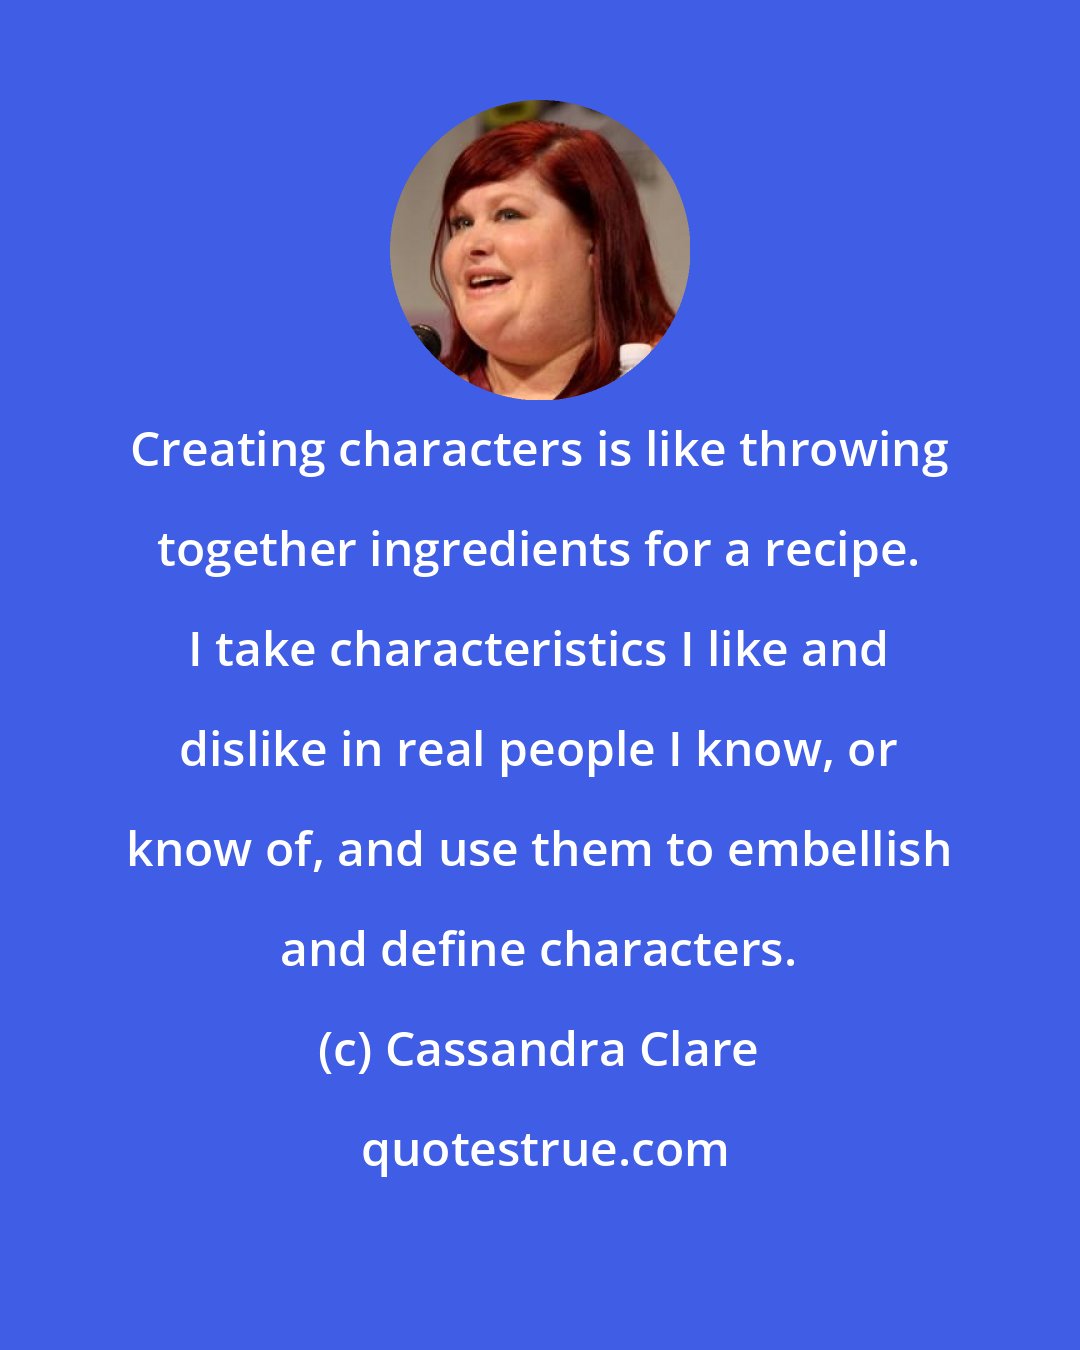 Cassandra Clare: Creating characters is like throwing together ingredients for a recipe. I take characteristics I like and dislike in real people I know, or know of, and use them to embellish and define characters.